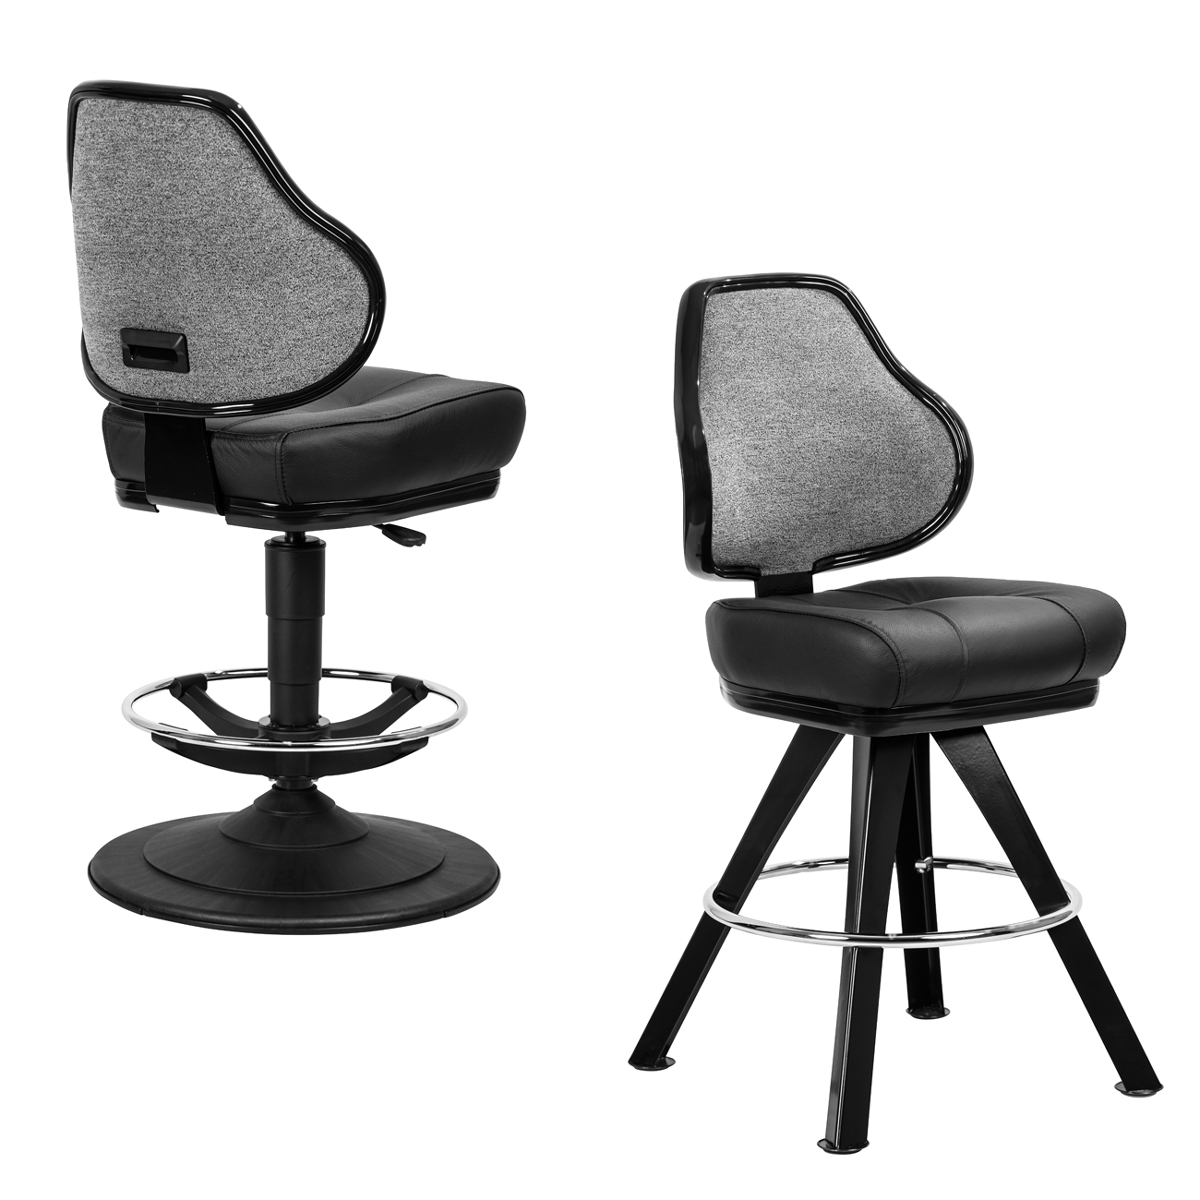 Orion Casino Gaming chairs for table games and for use at a poker machine